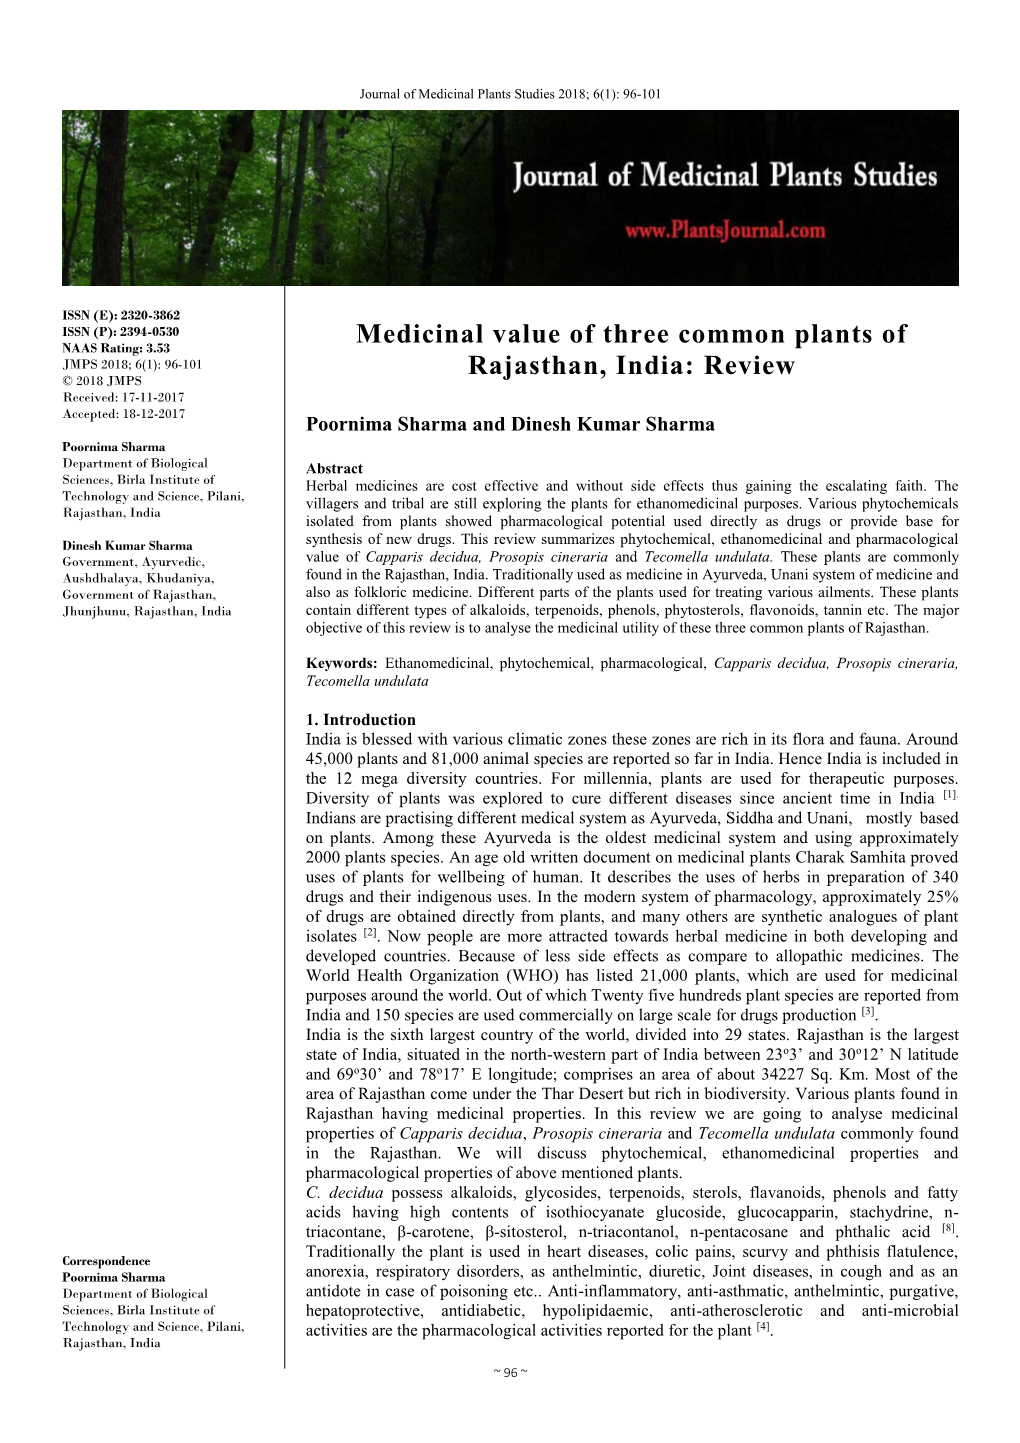 Medicinal Value of Three Common Plants of Rajasthan, India: Review